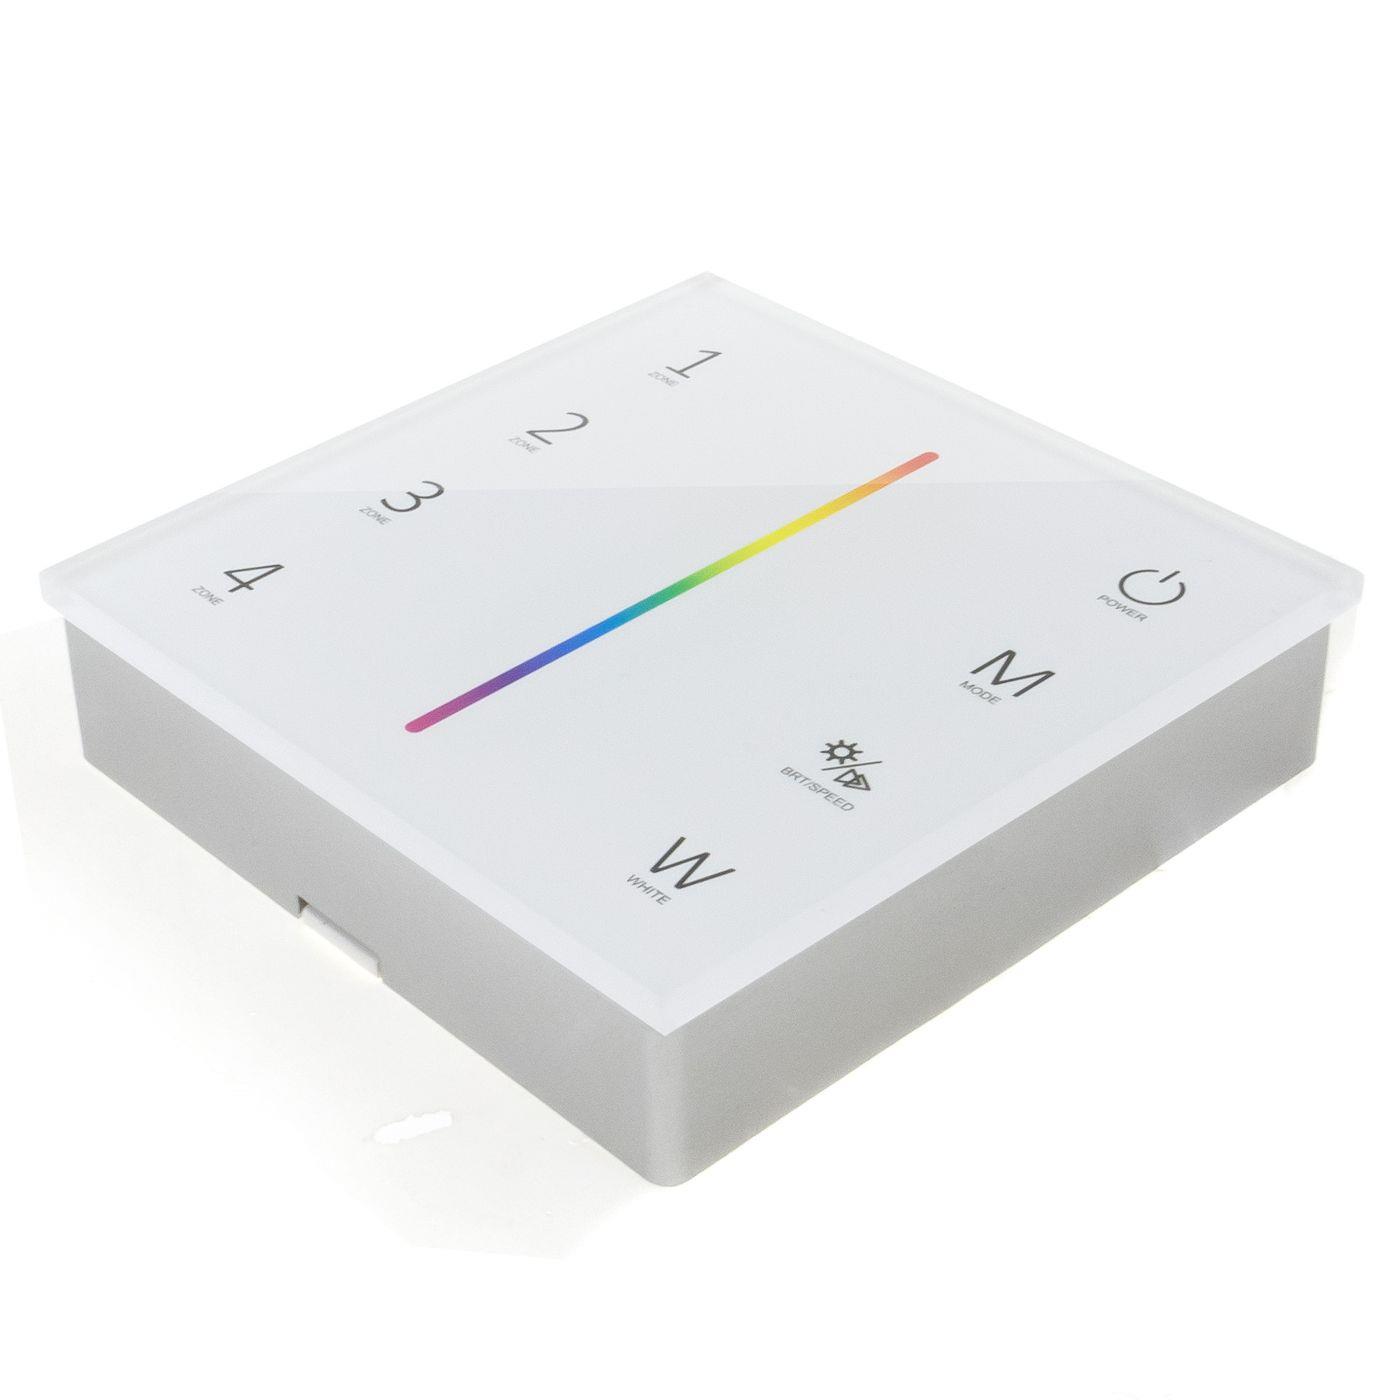 Elegance RGB RGBW LED 4-Zone Wall Touch Panel Controller Battery for colour changing strips 4-Pin + 5-Pin